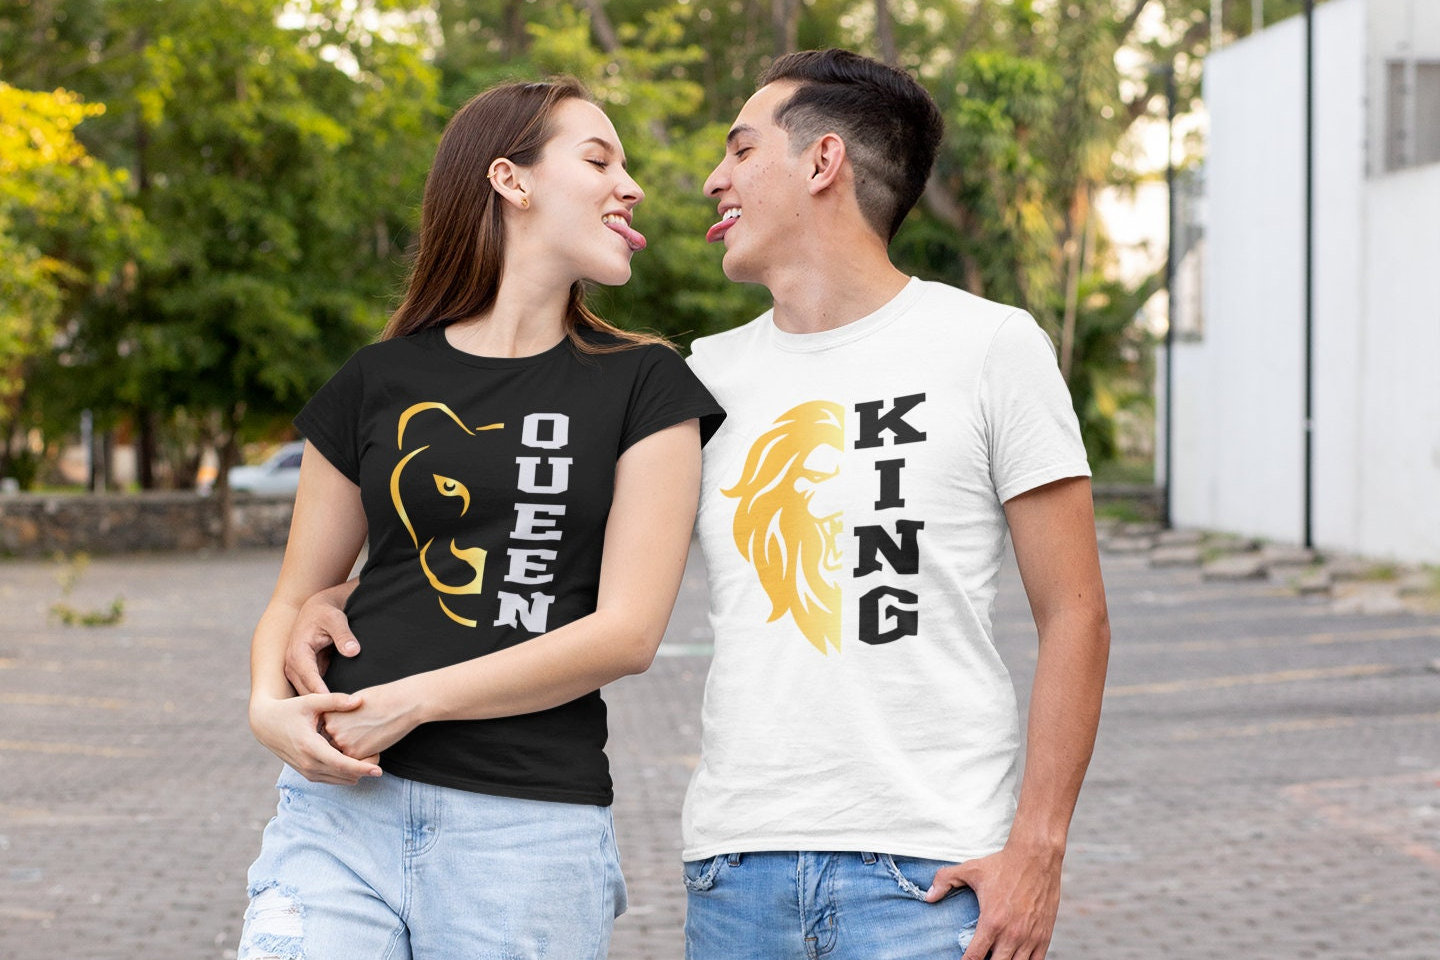 Matching Outfits for Couples Gifts for Him and Her King Queen Couple Shirts  Boys Girls Kids Tee Top